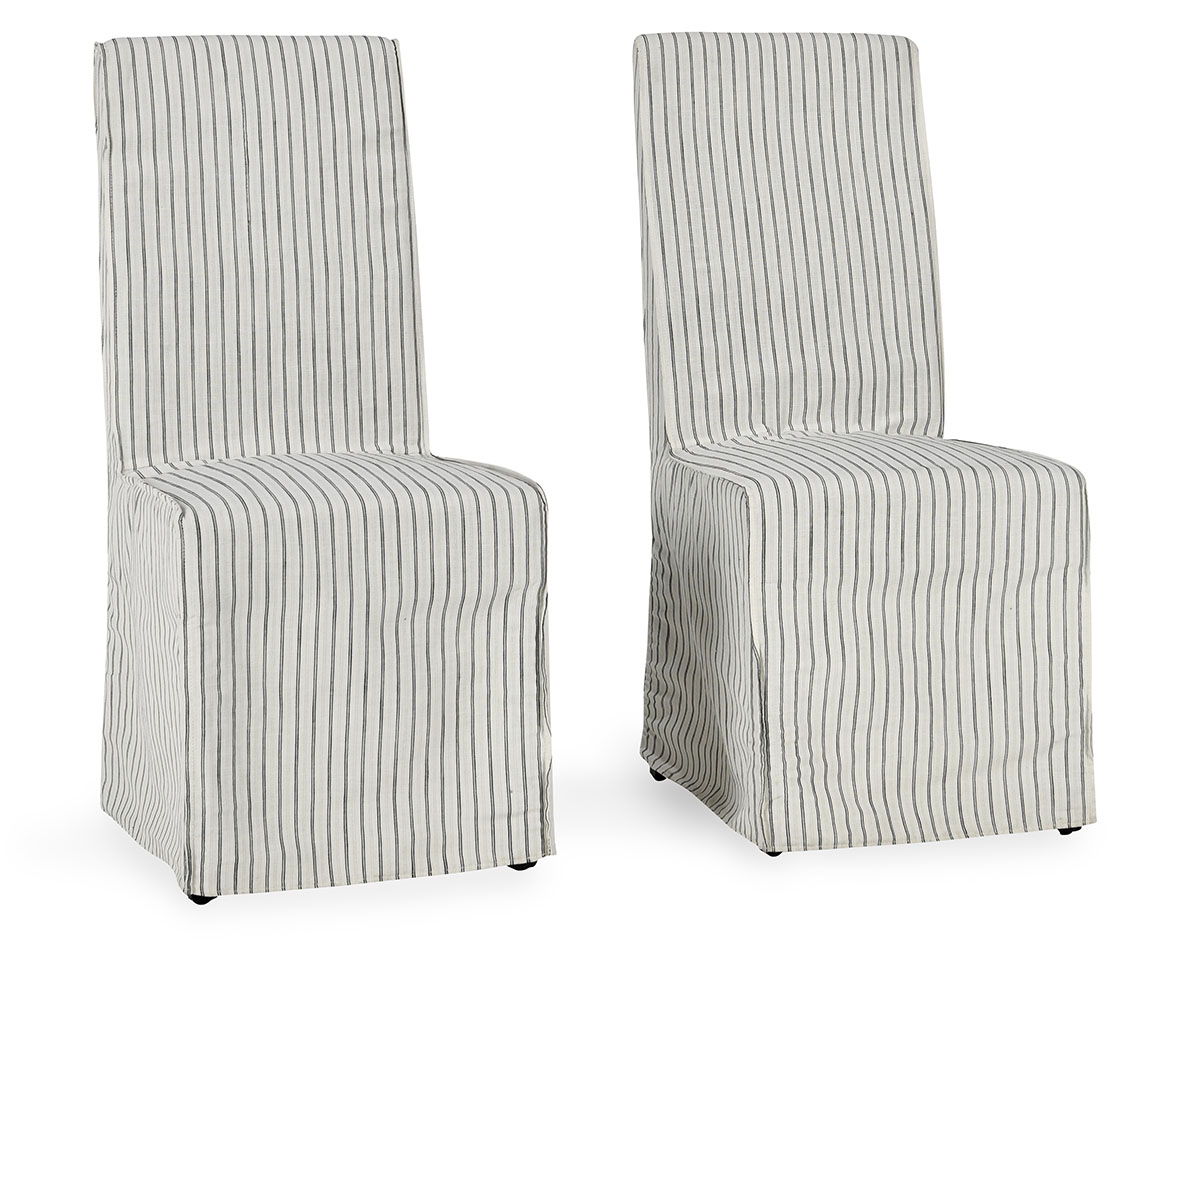 Arianna - Upholstered Dining Chair (Set of 2) - Striped